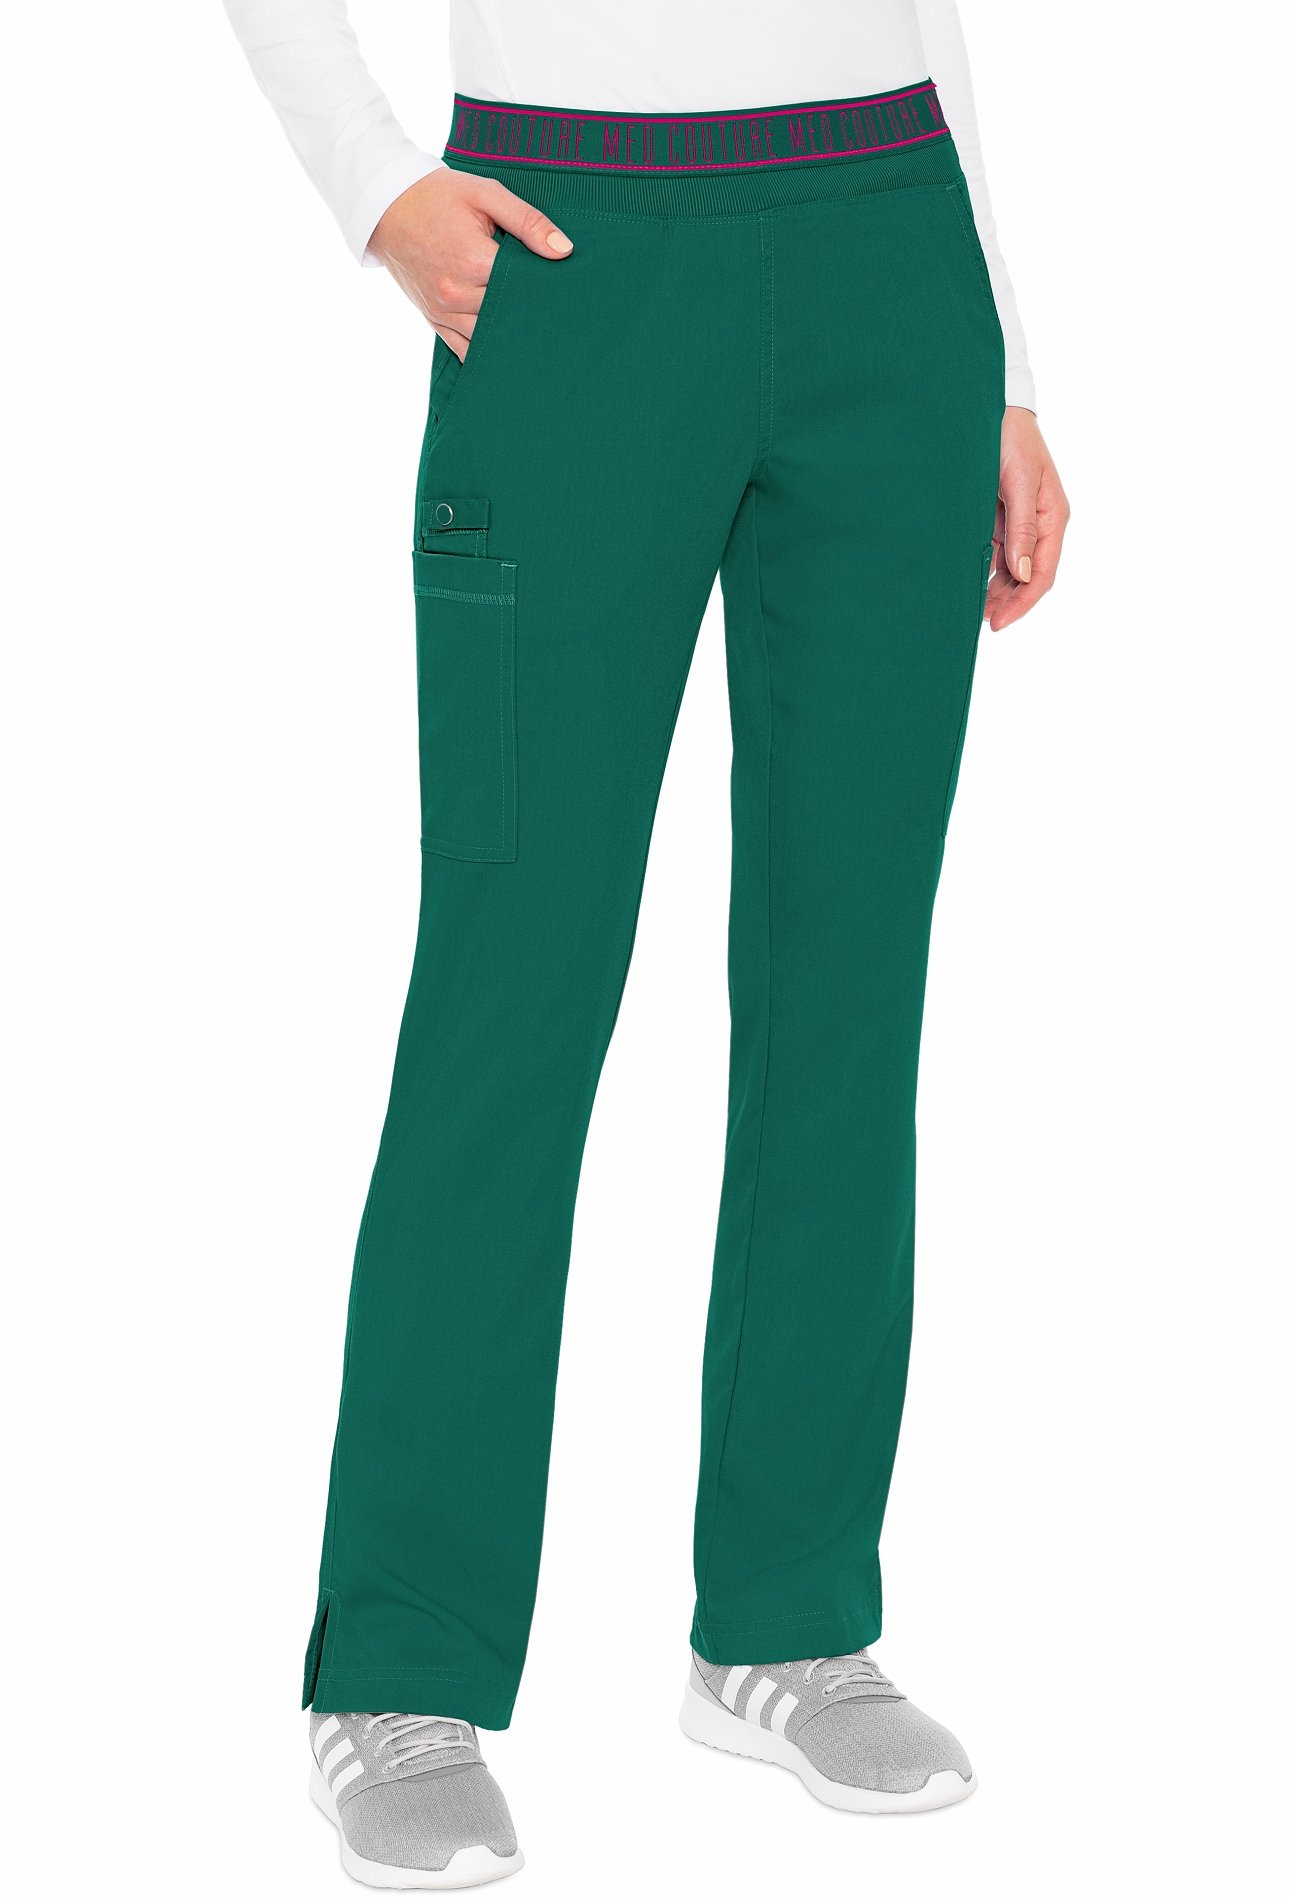 Med Couture Scrubs on X: #MedCouture Activate Flow Cargo Pant is the  perfect cross section of comfort and cool. Shop it here:    / X